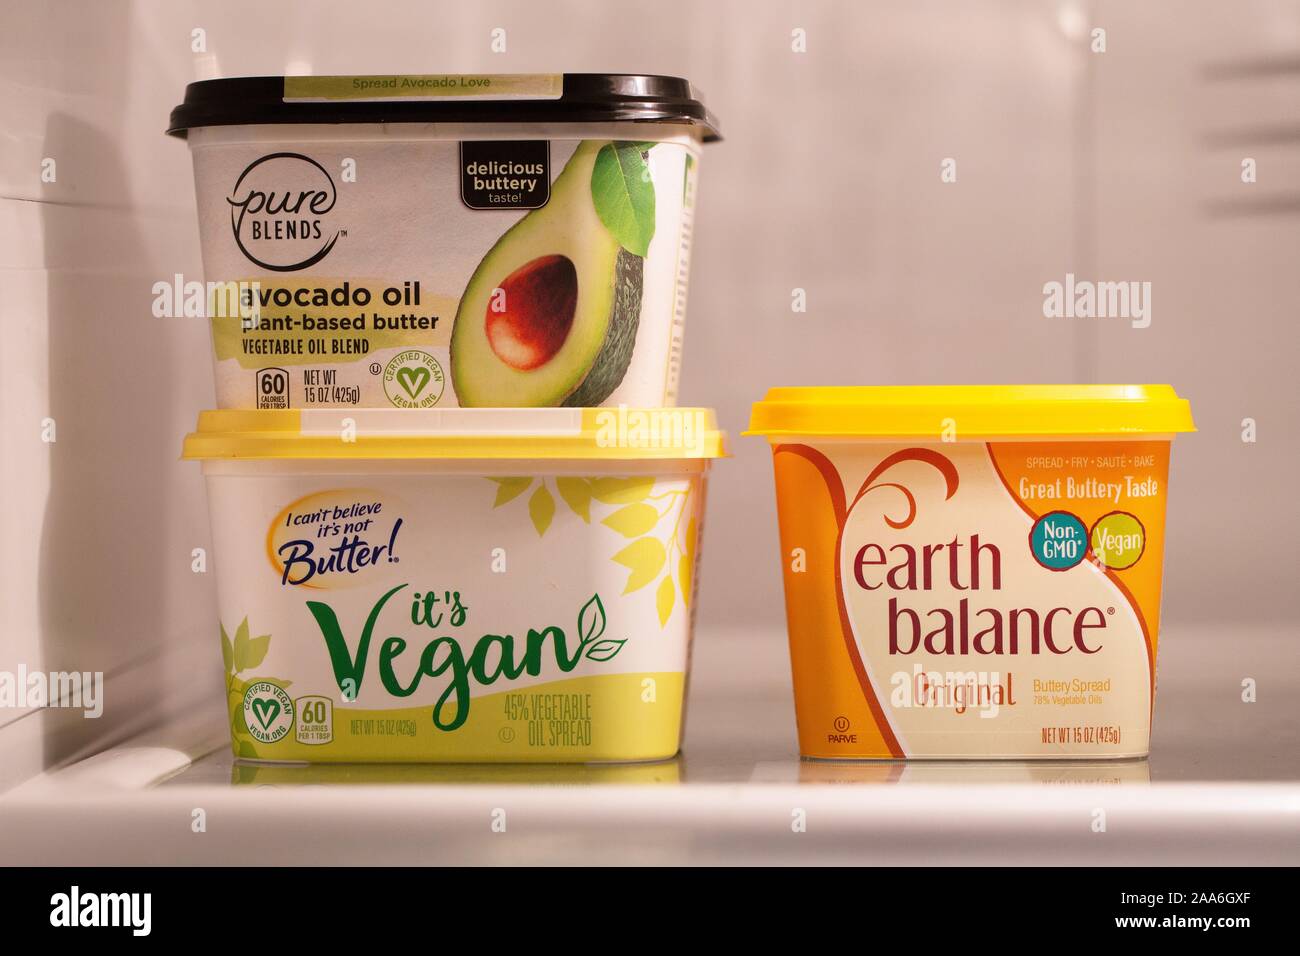 Vegan non-dairy products on a refrigerator shelf. Stock Photo